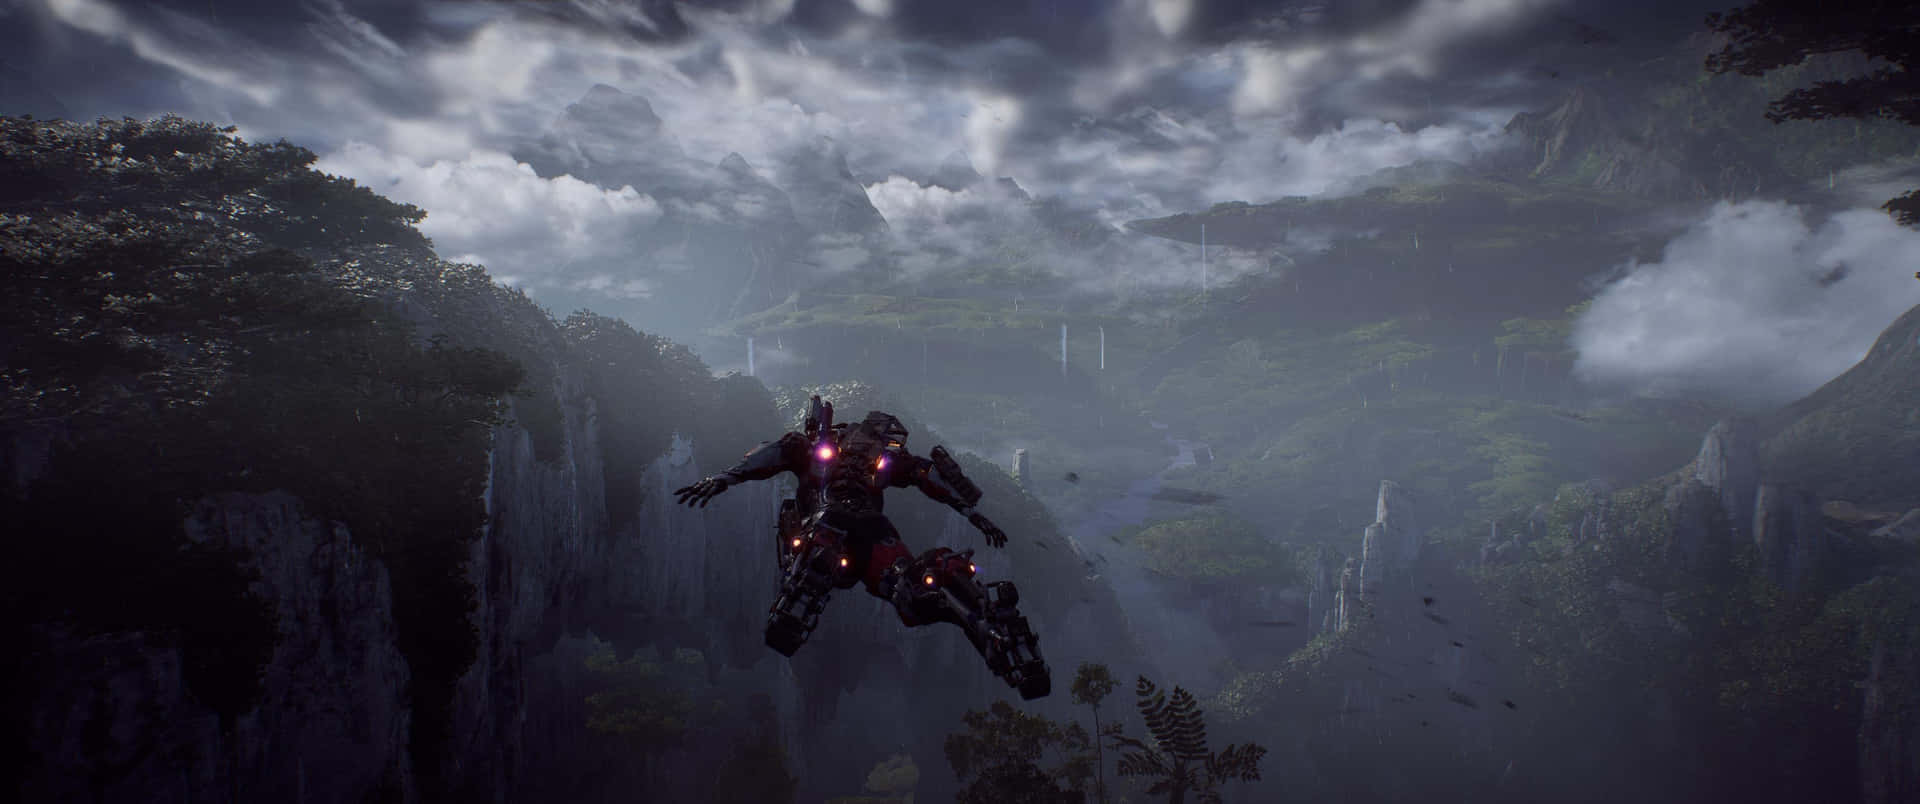 Pilot your Javelin and explore the world of Anthem in this epic new sci-fi shooter from EA. Wallpaper